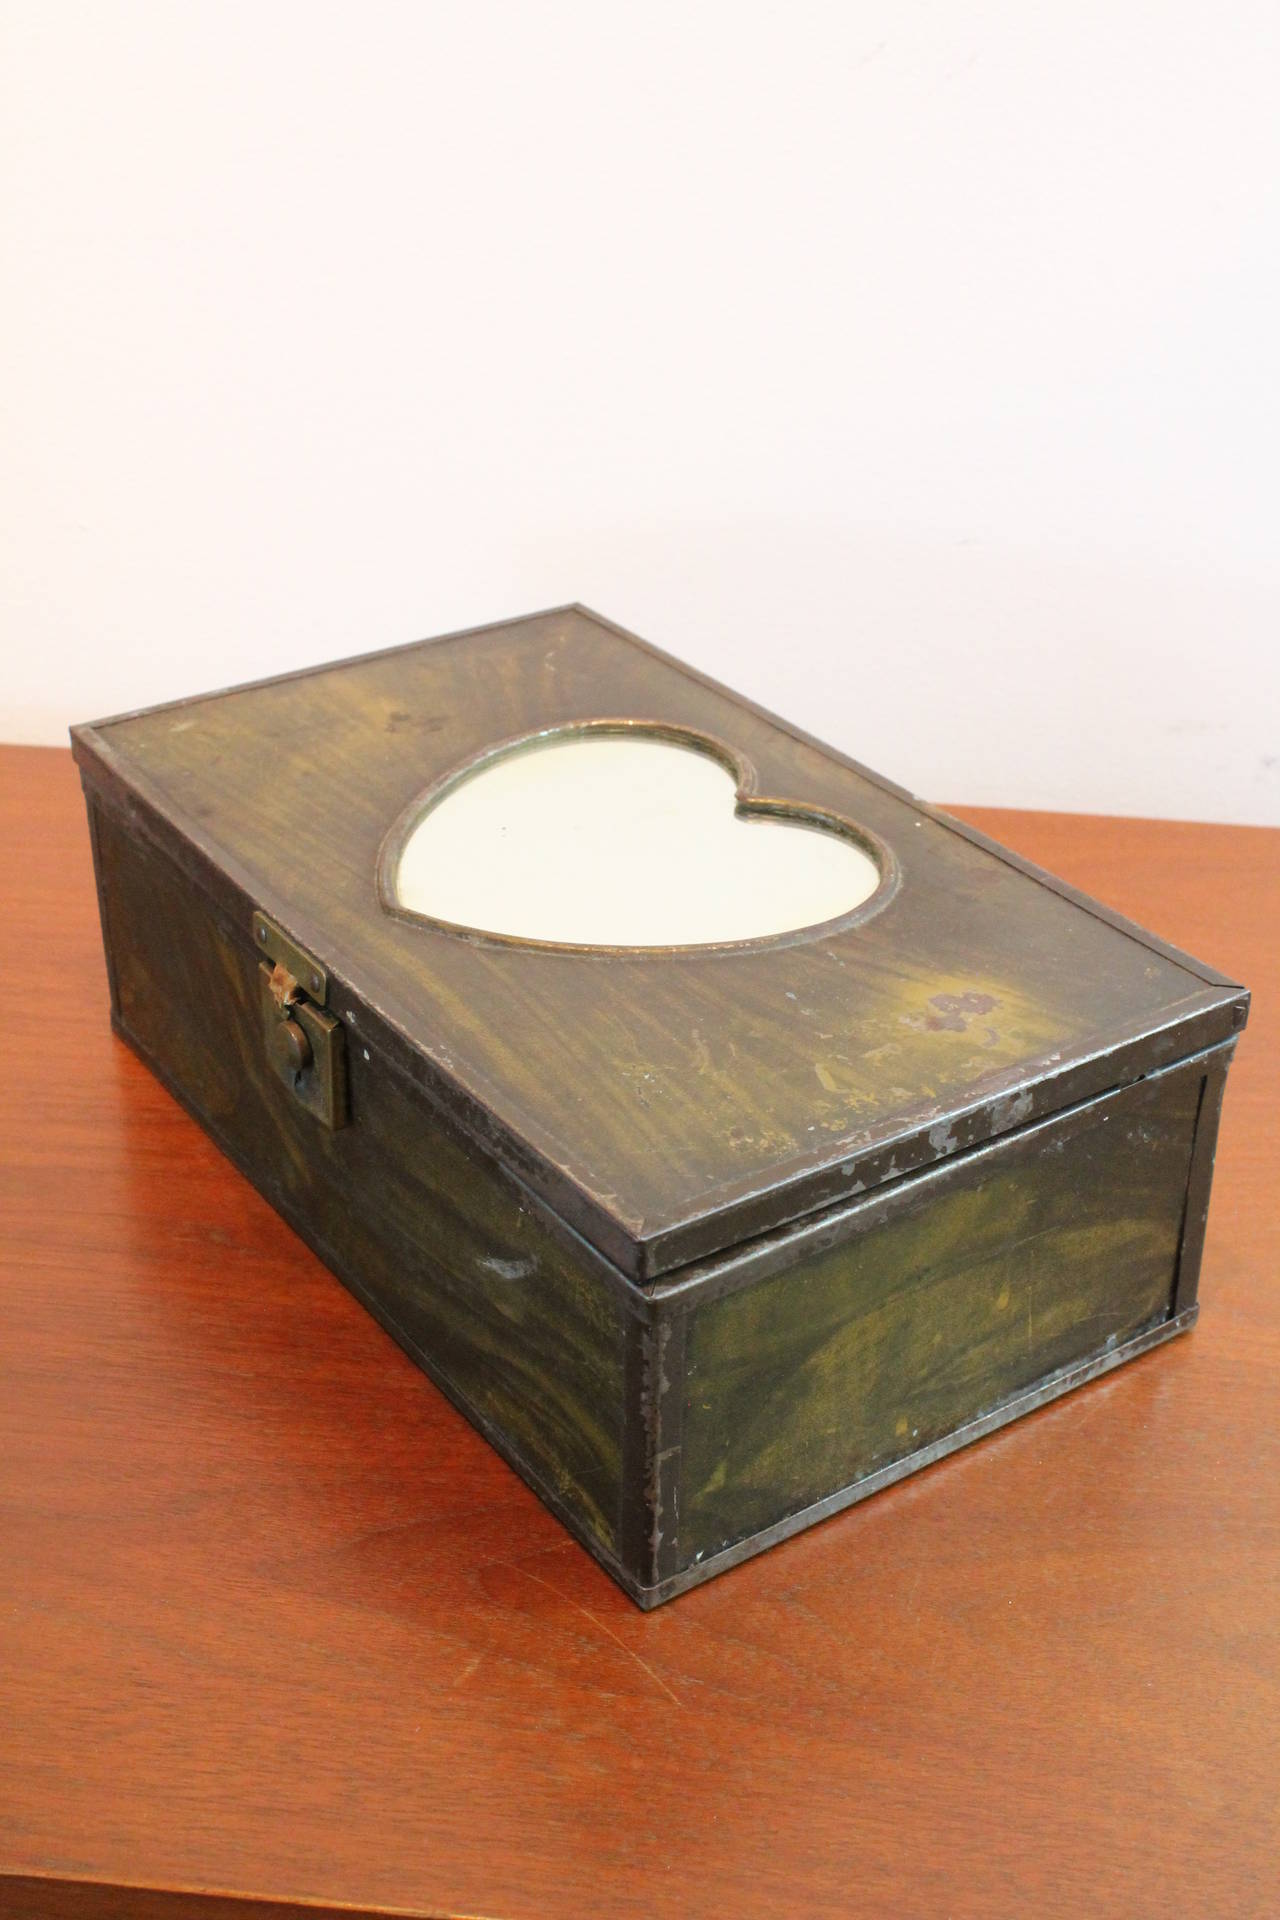 Tole faux grain metal box with a heart shaped mirror on the top.